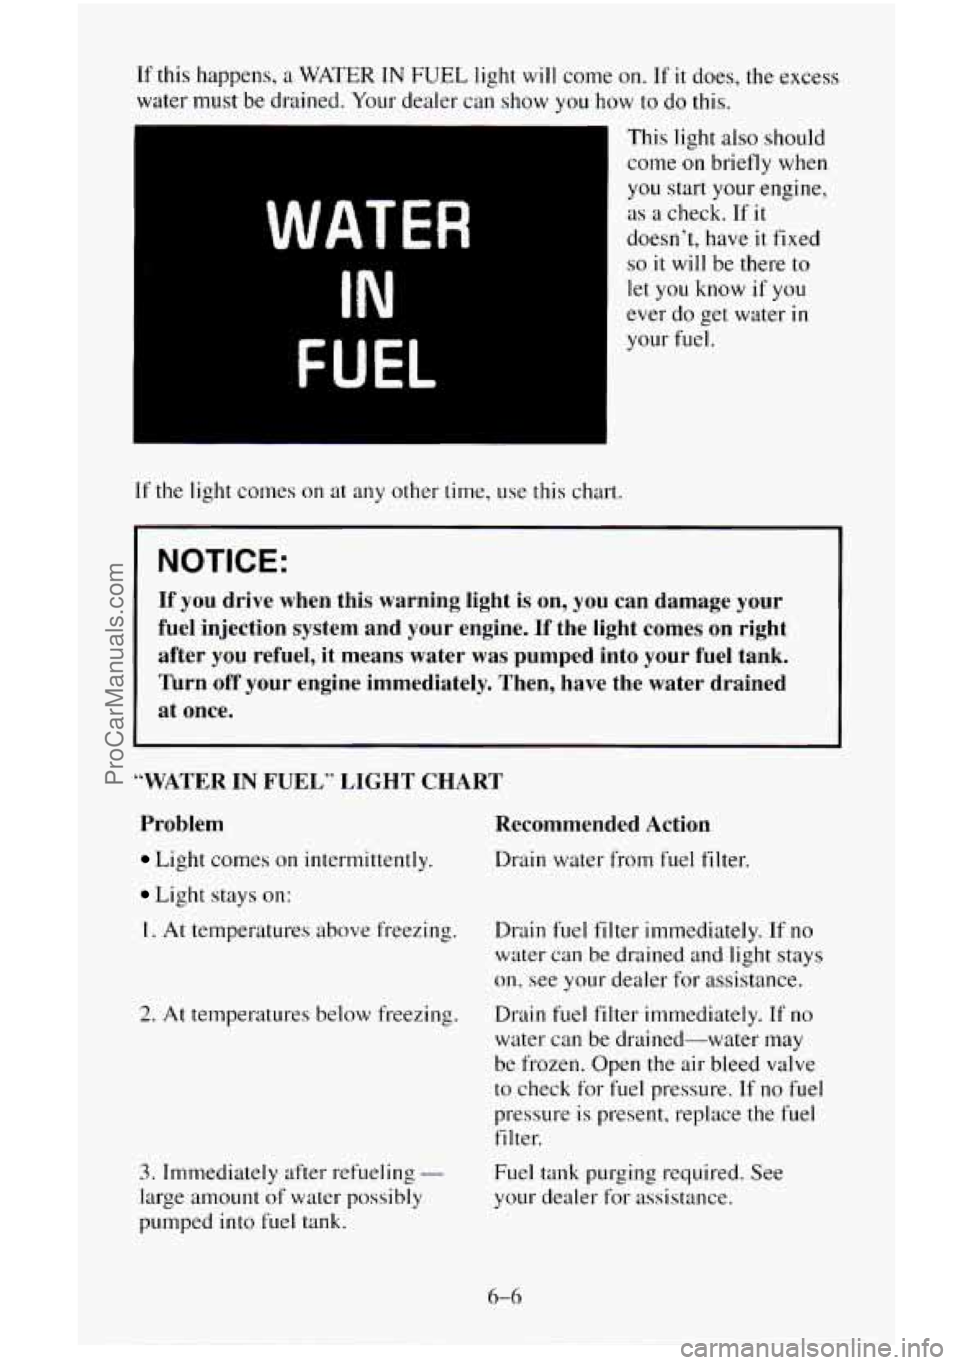 CHEVROLET SUBURBAN 1995  Owners Manual If this happens, a WATER IN FUEL light will  come 
water must  be drained.  Your  Cfpder  can show you 
hc 
I 
WATER 
IN 
FUEL 
If the light comes  on  at any other  time, use this  chart. 
! on. If i